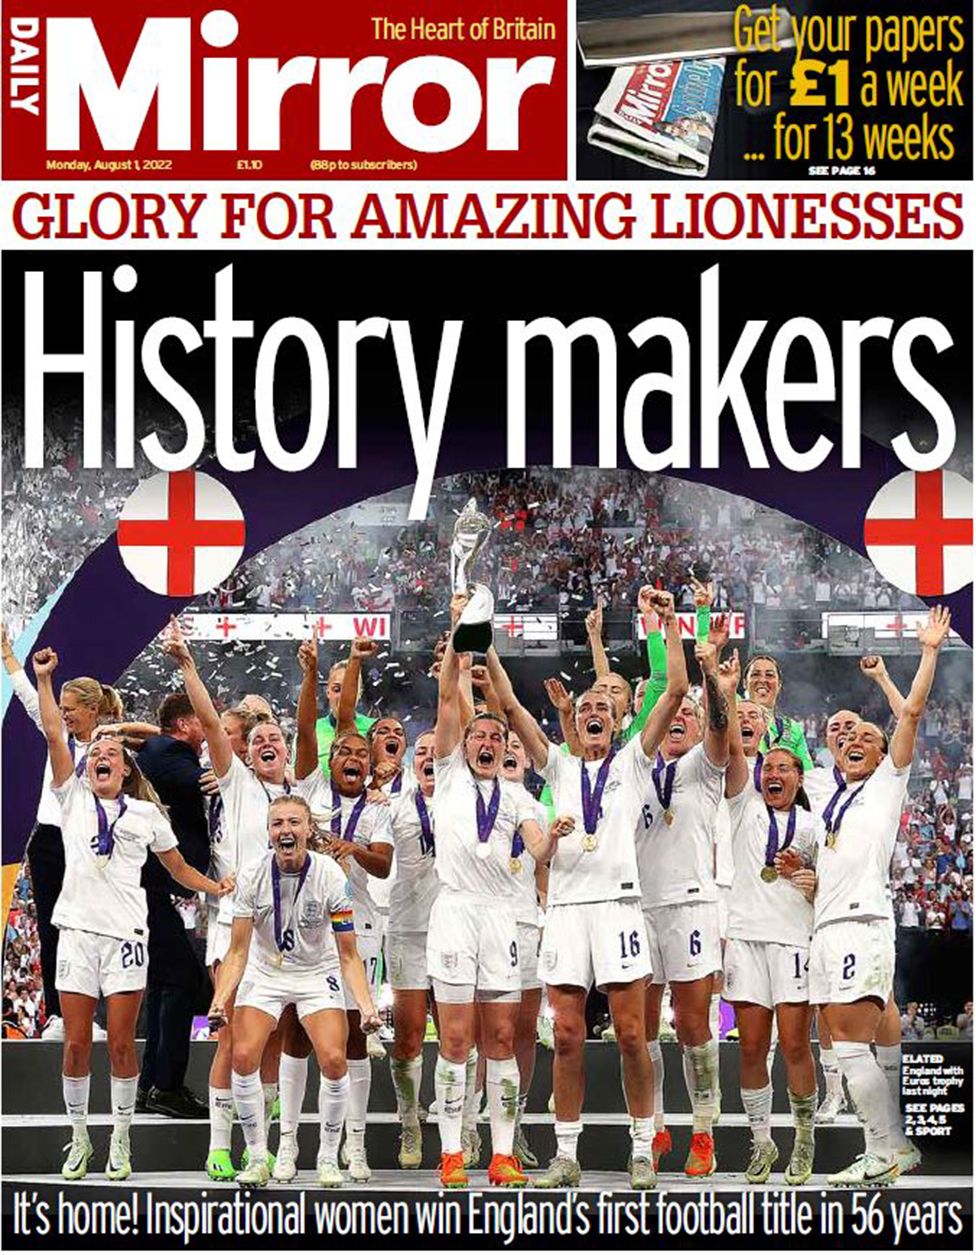 The Daily Mirror front page 1 August 2022